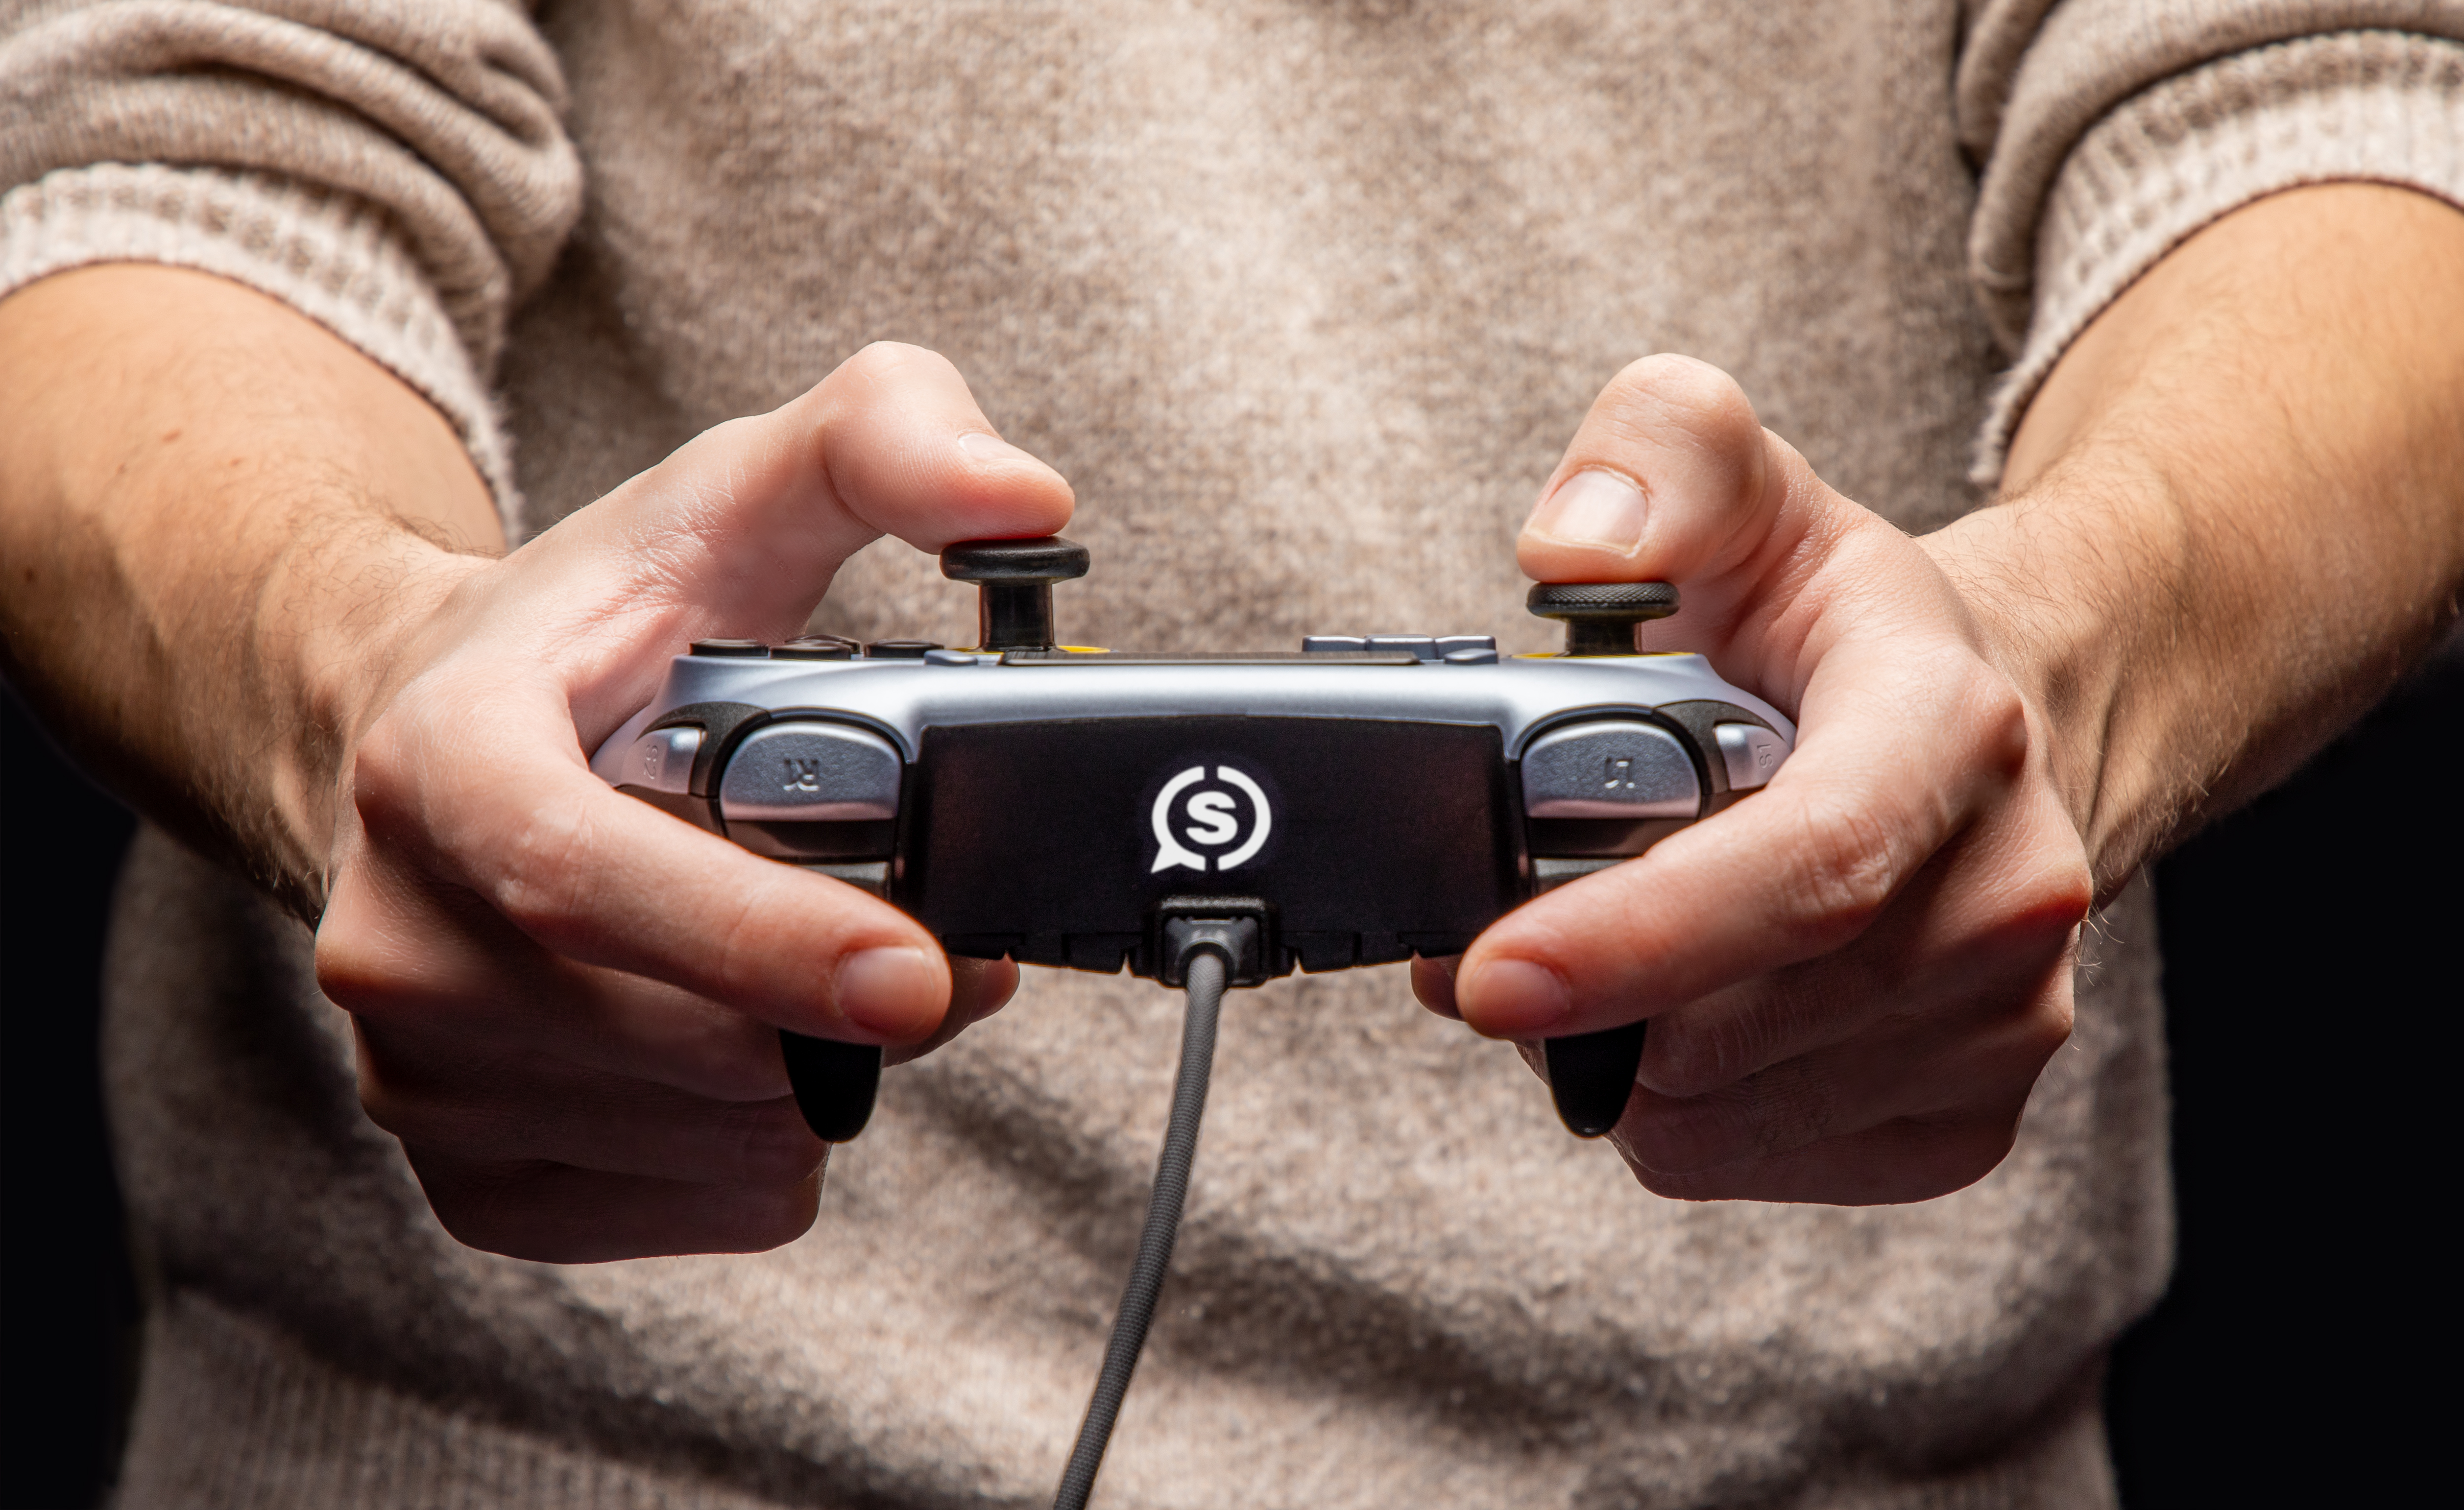 Scuf's Vantage Controller Will Bring The Elite Treatment To PS4